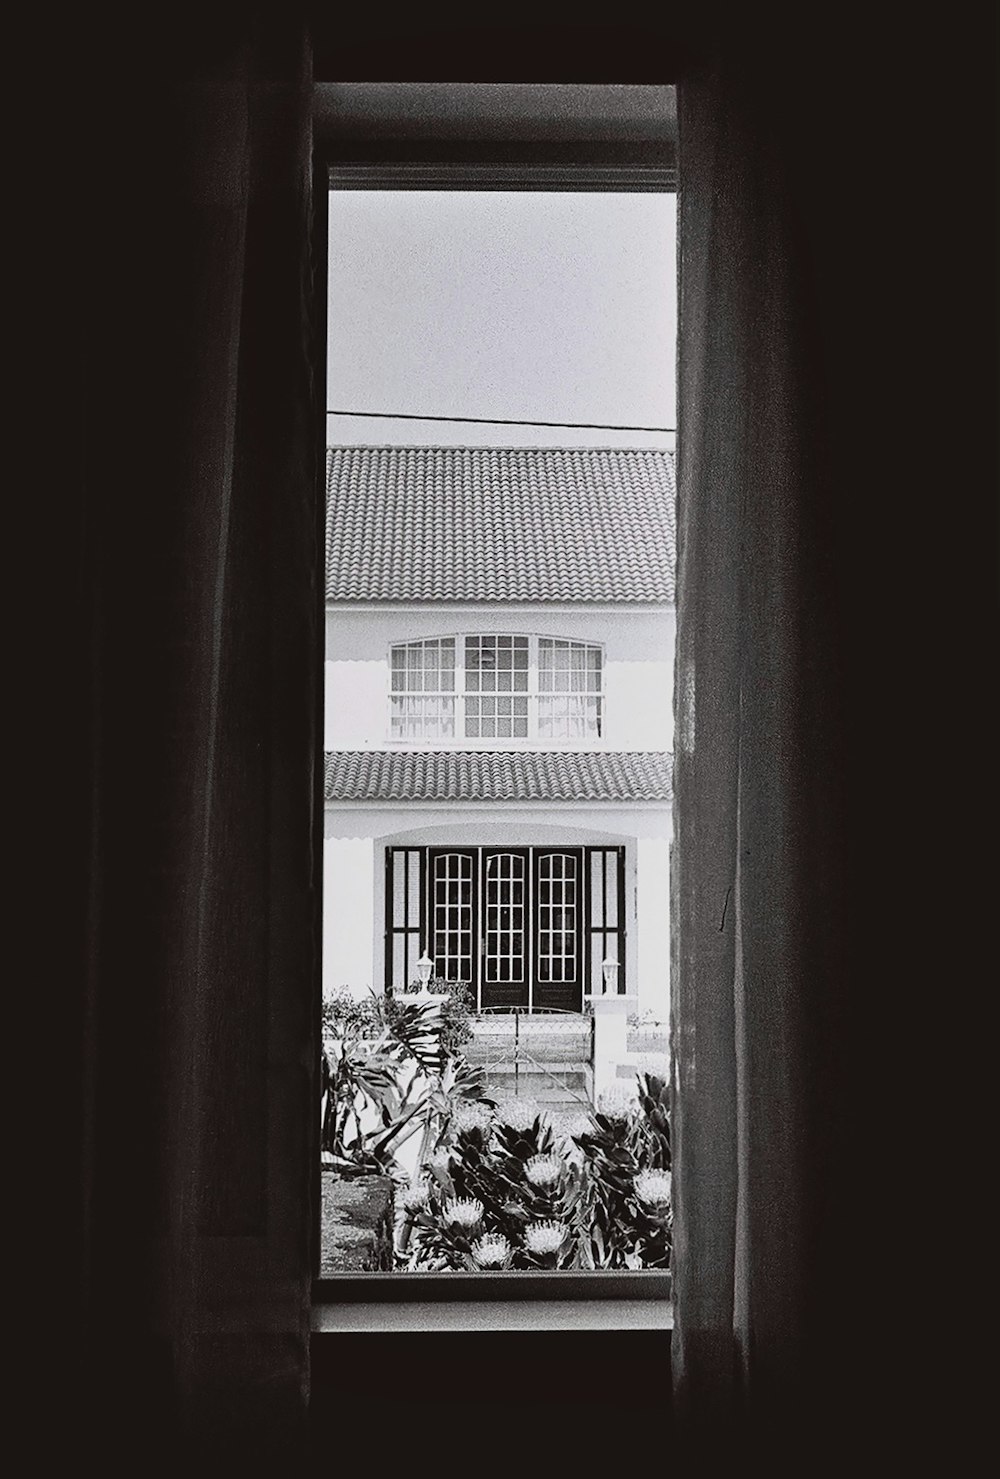 a black and white photo of a house through a window